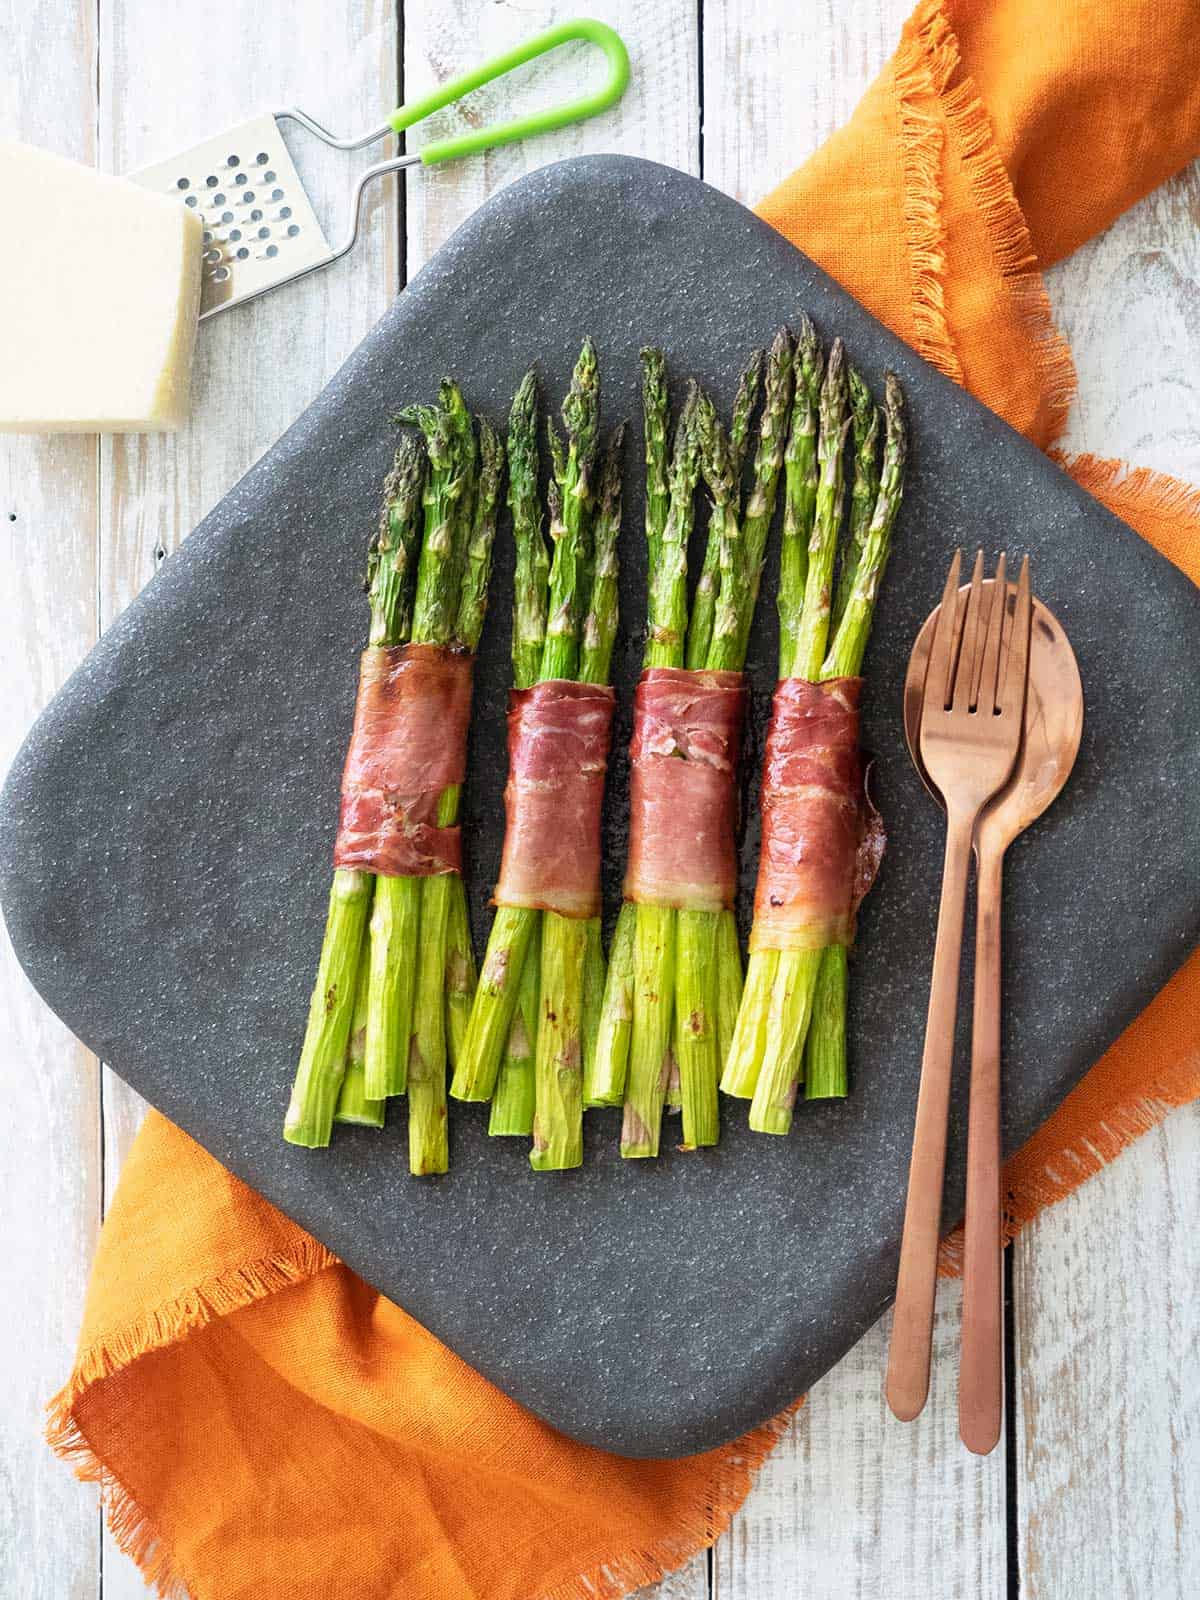 Undressed asparagus bundles on a black plate with serving spoons.